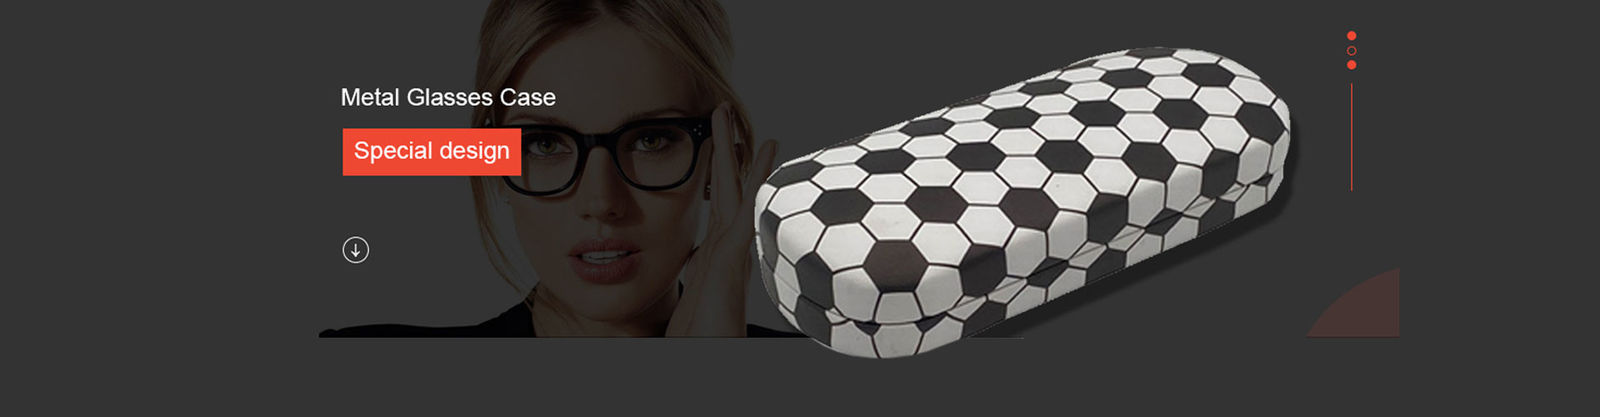 China best Metal Glasses Case on sales